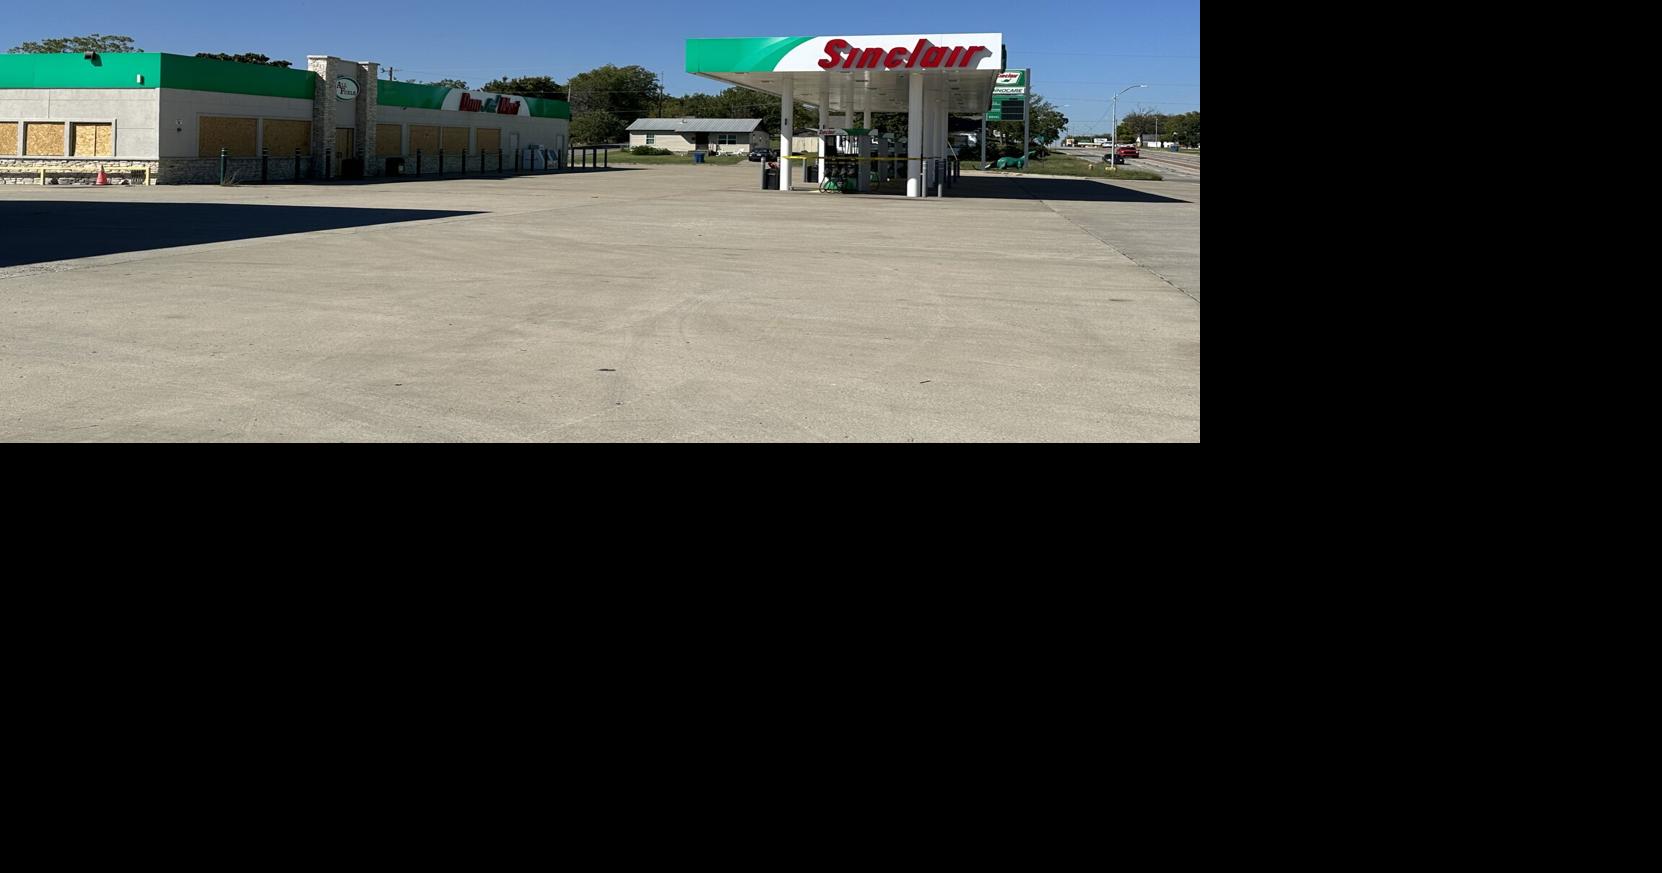 Millers: Convenience Store & Gas Station